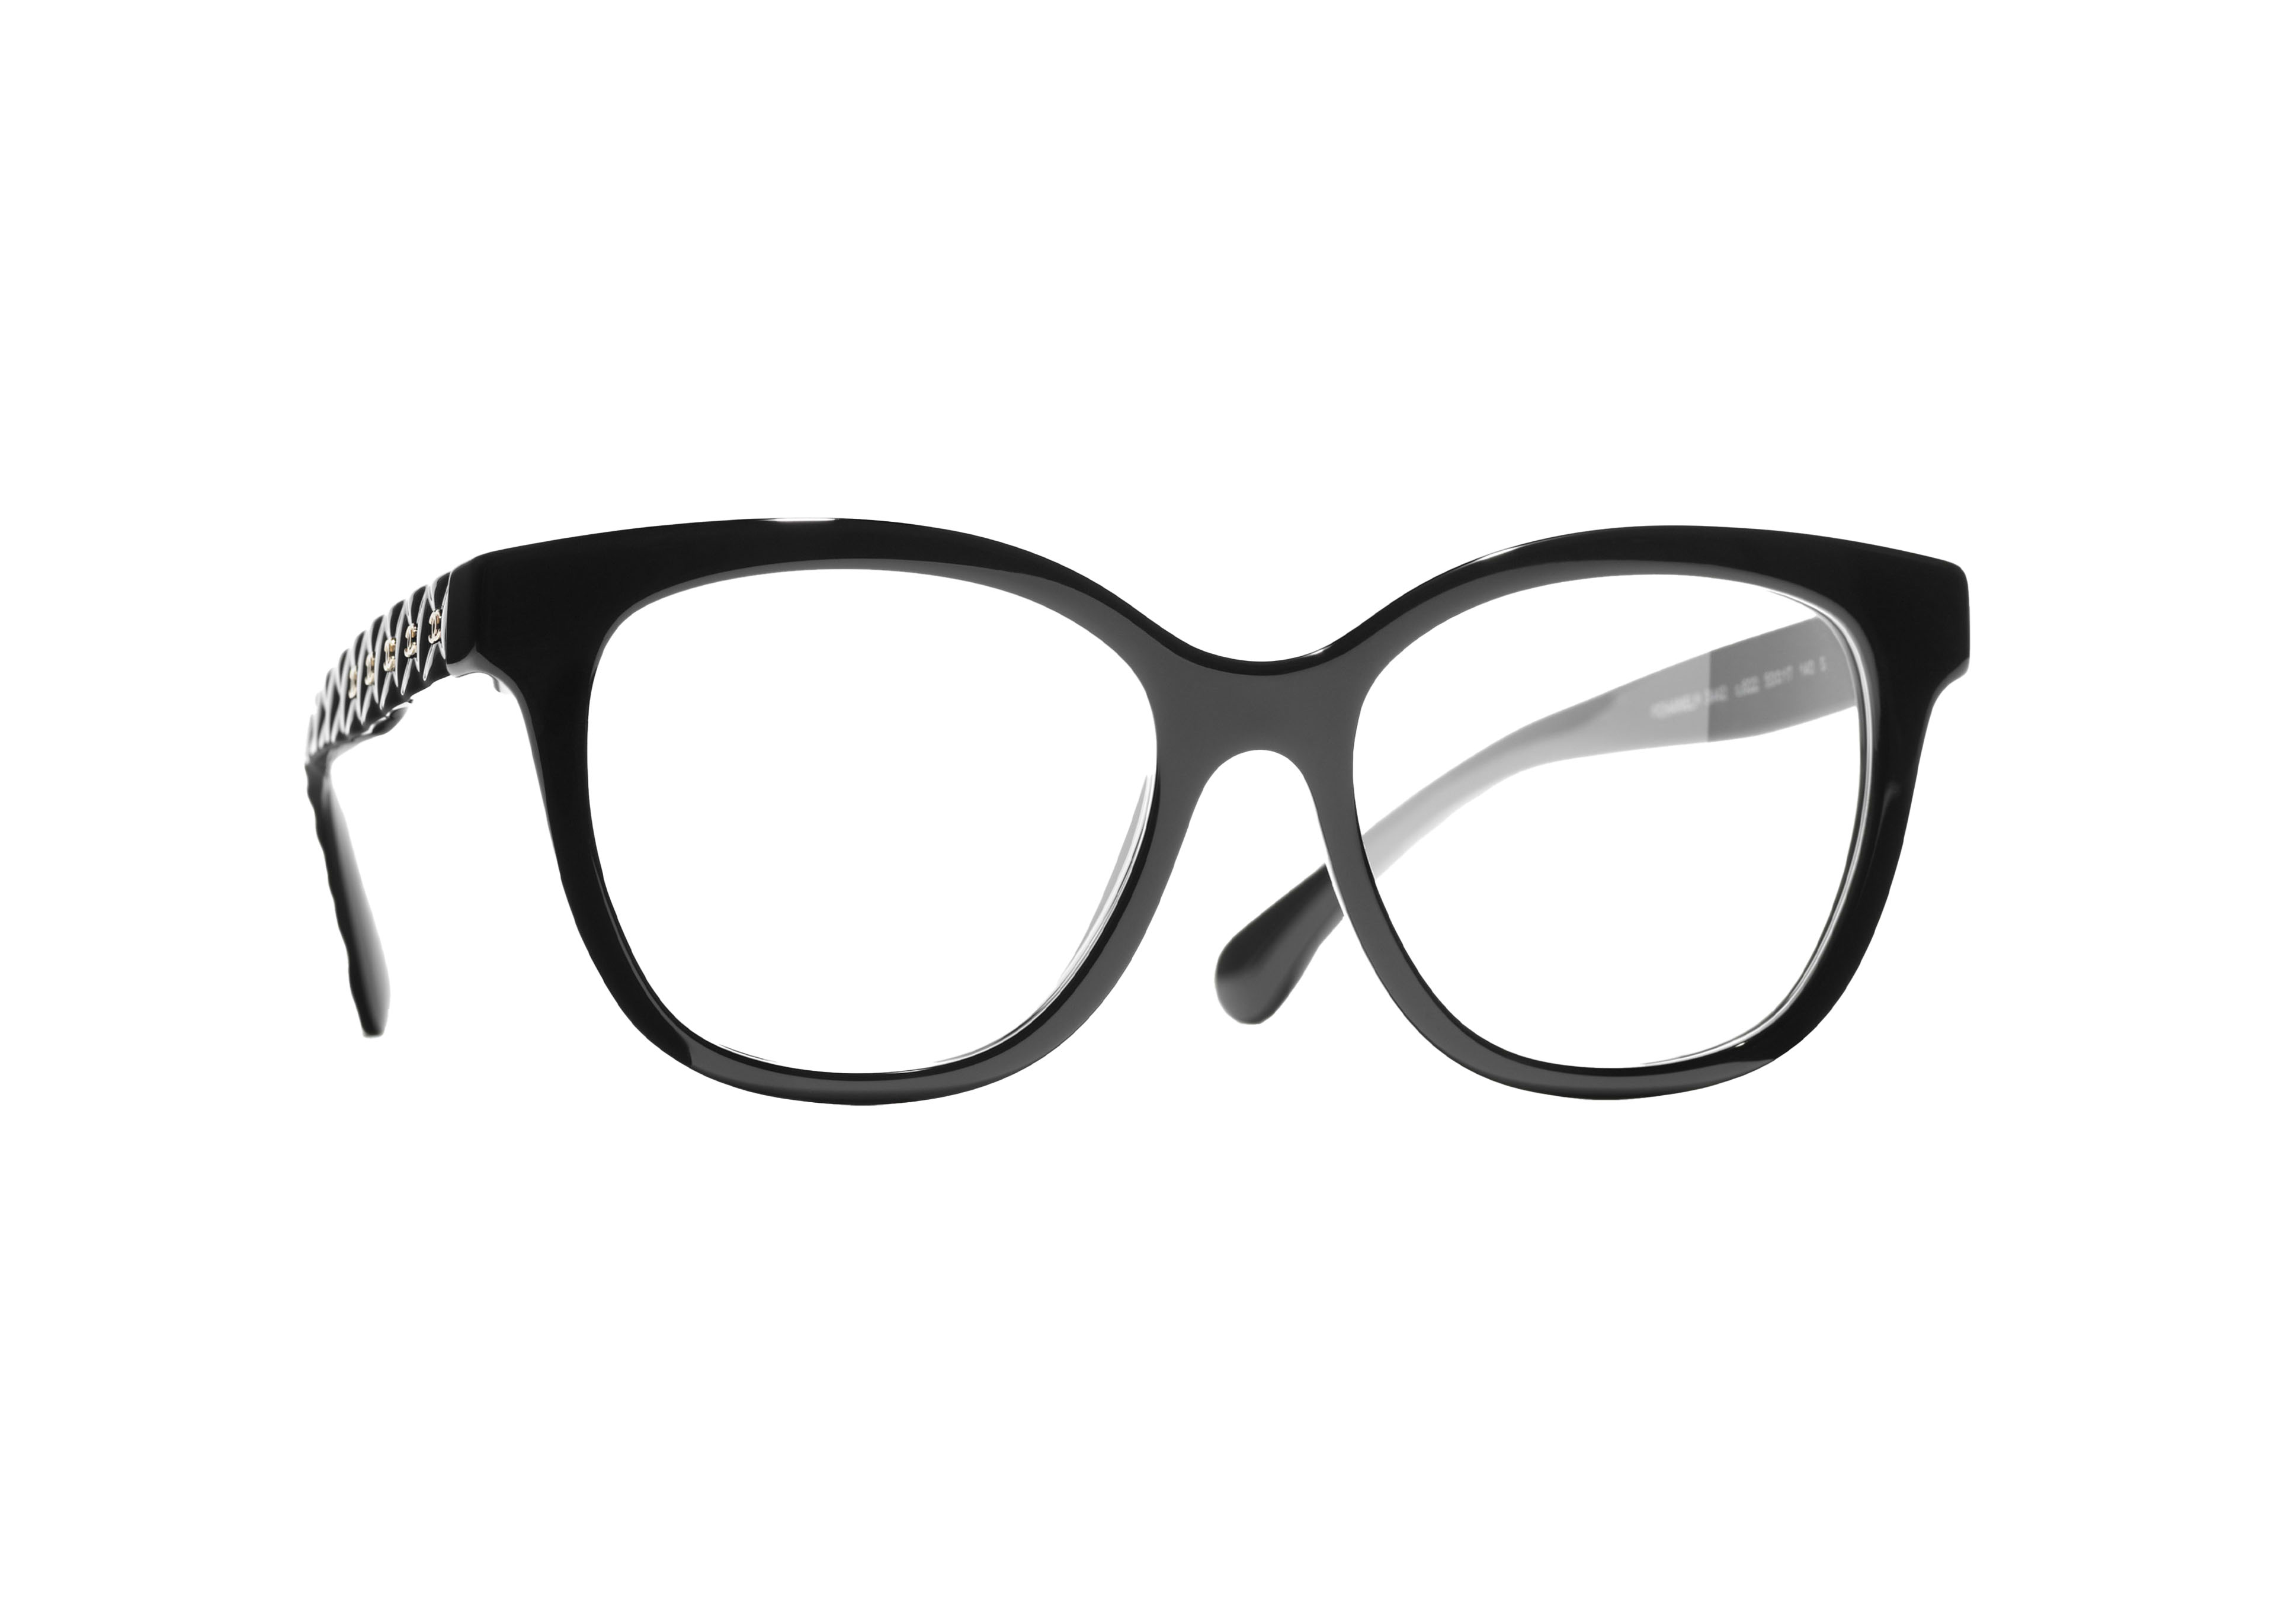 Chanel Butterfly Eyeglasses 53mm Black/Gold (3442 C622) in Acetate 